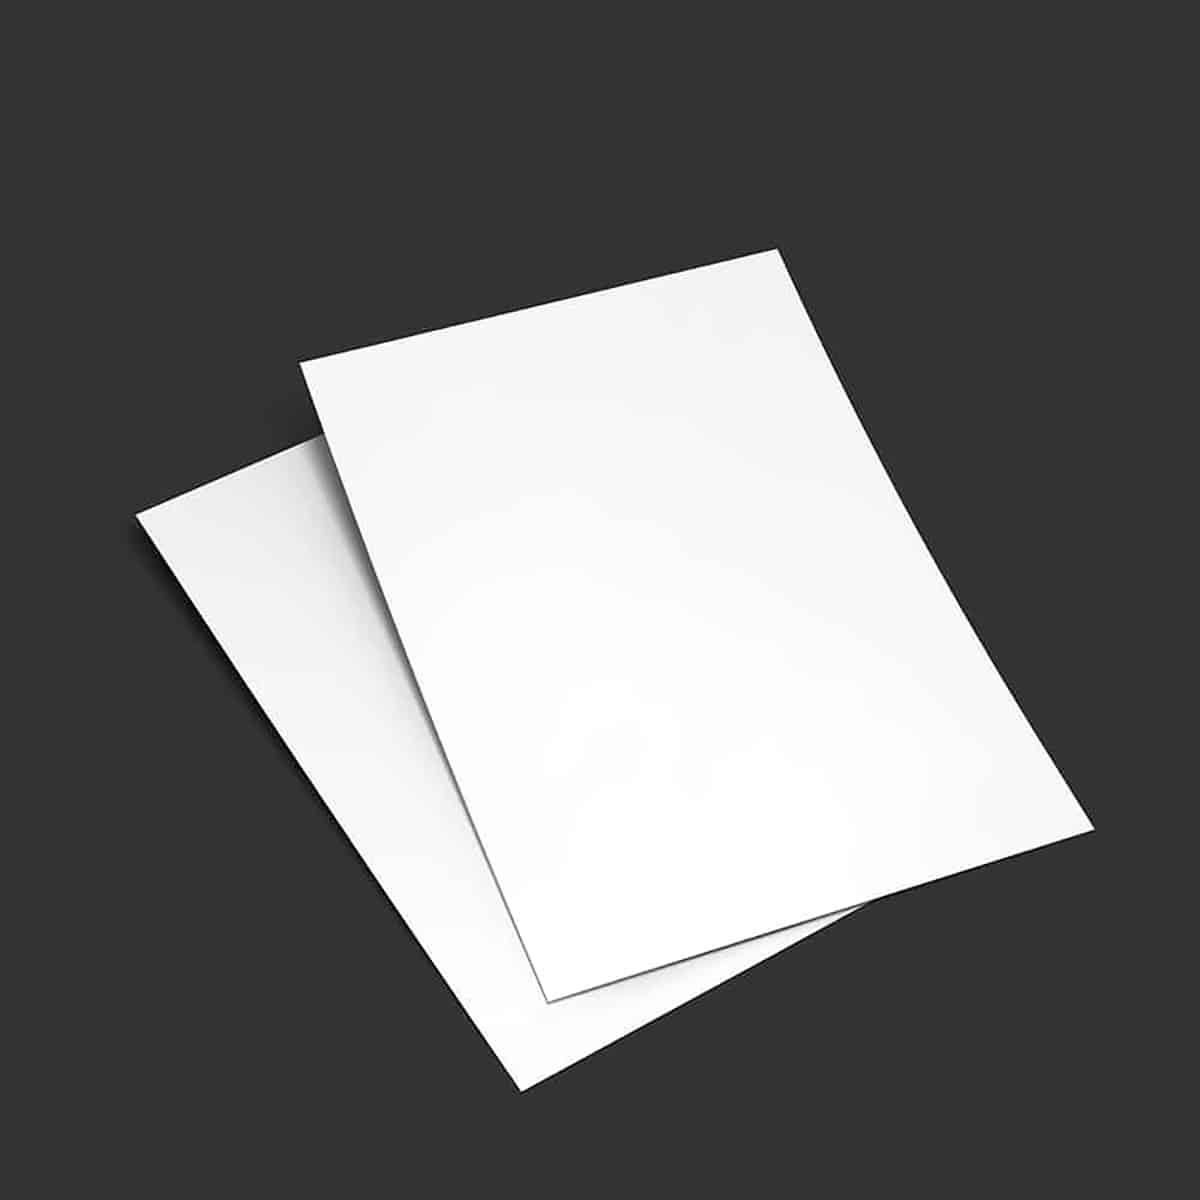 62.5 Sheets of Letter Paper